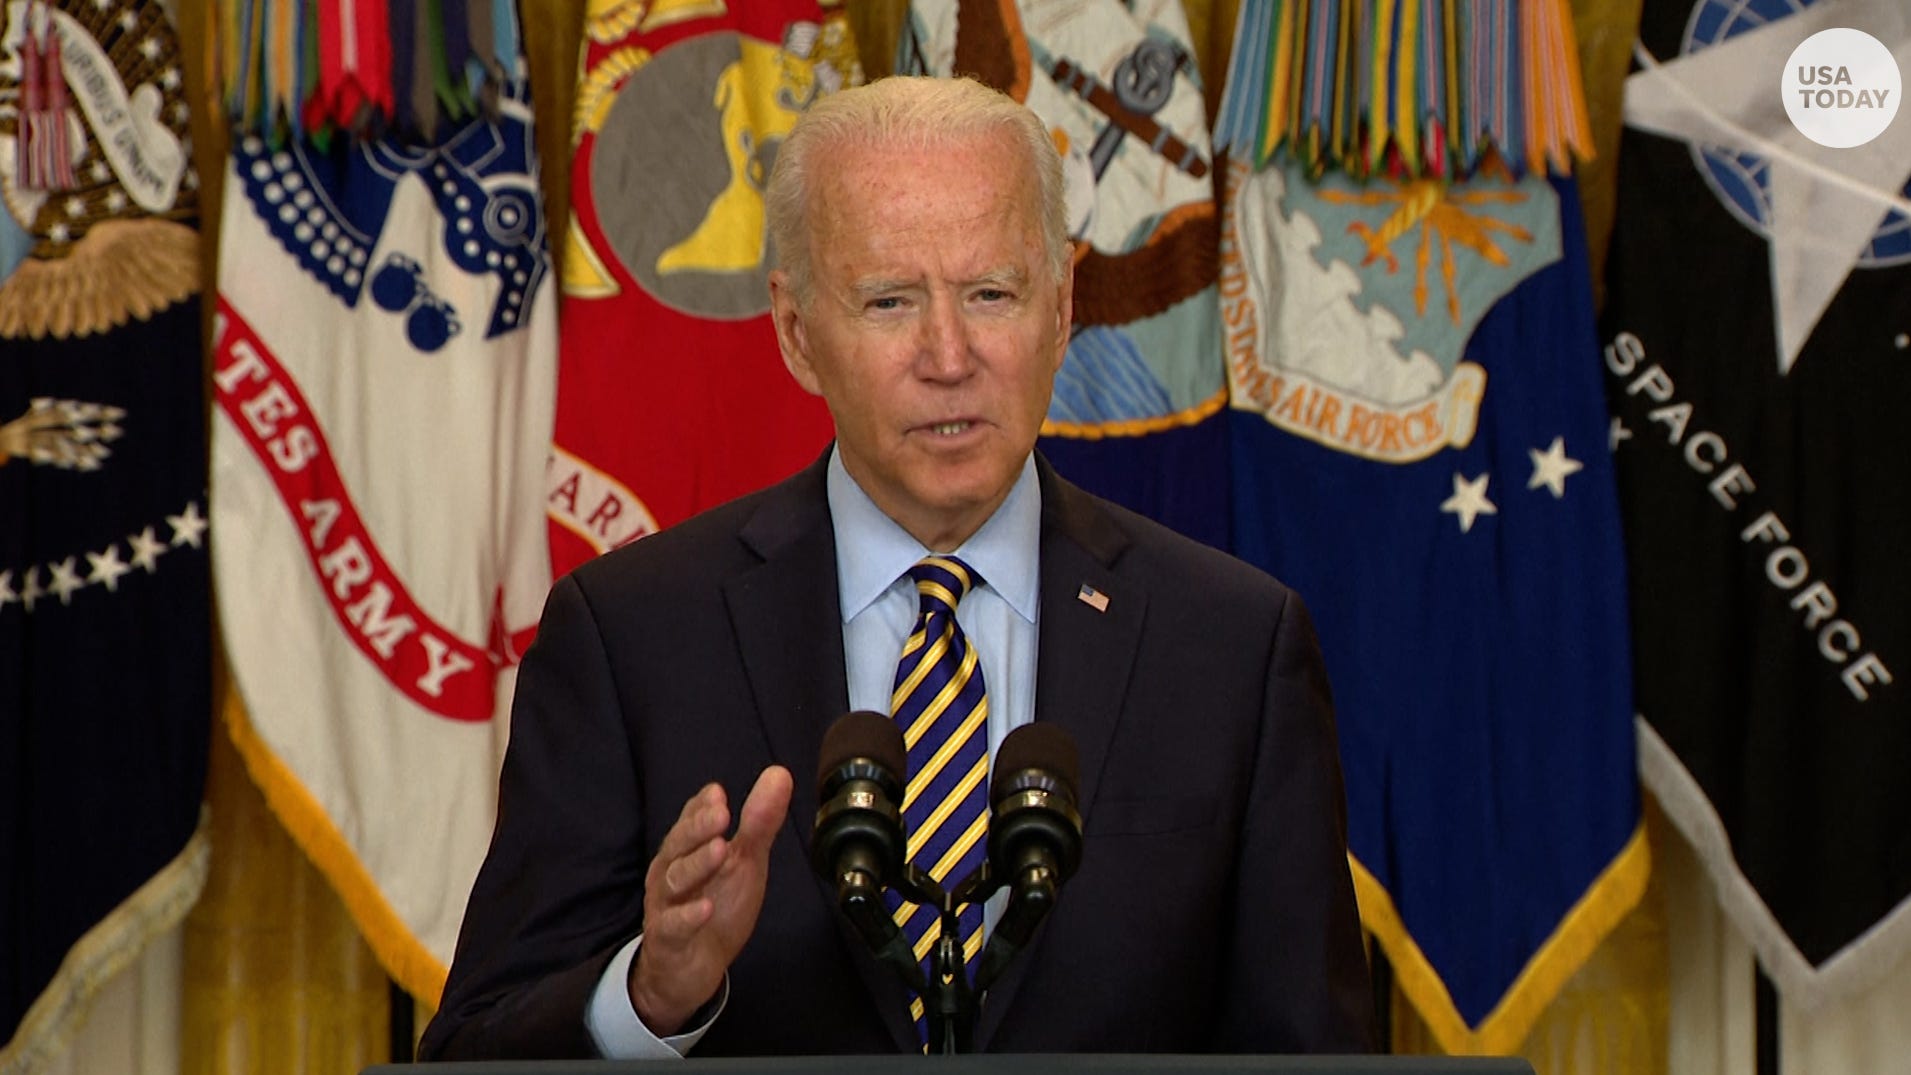 President Biden: “I will not send another generation of Americans to war in Afghanistan…”